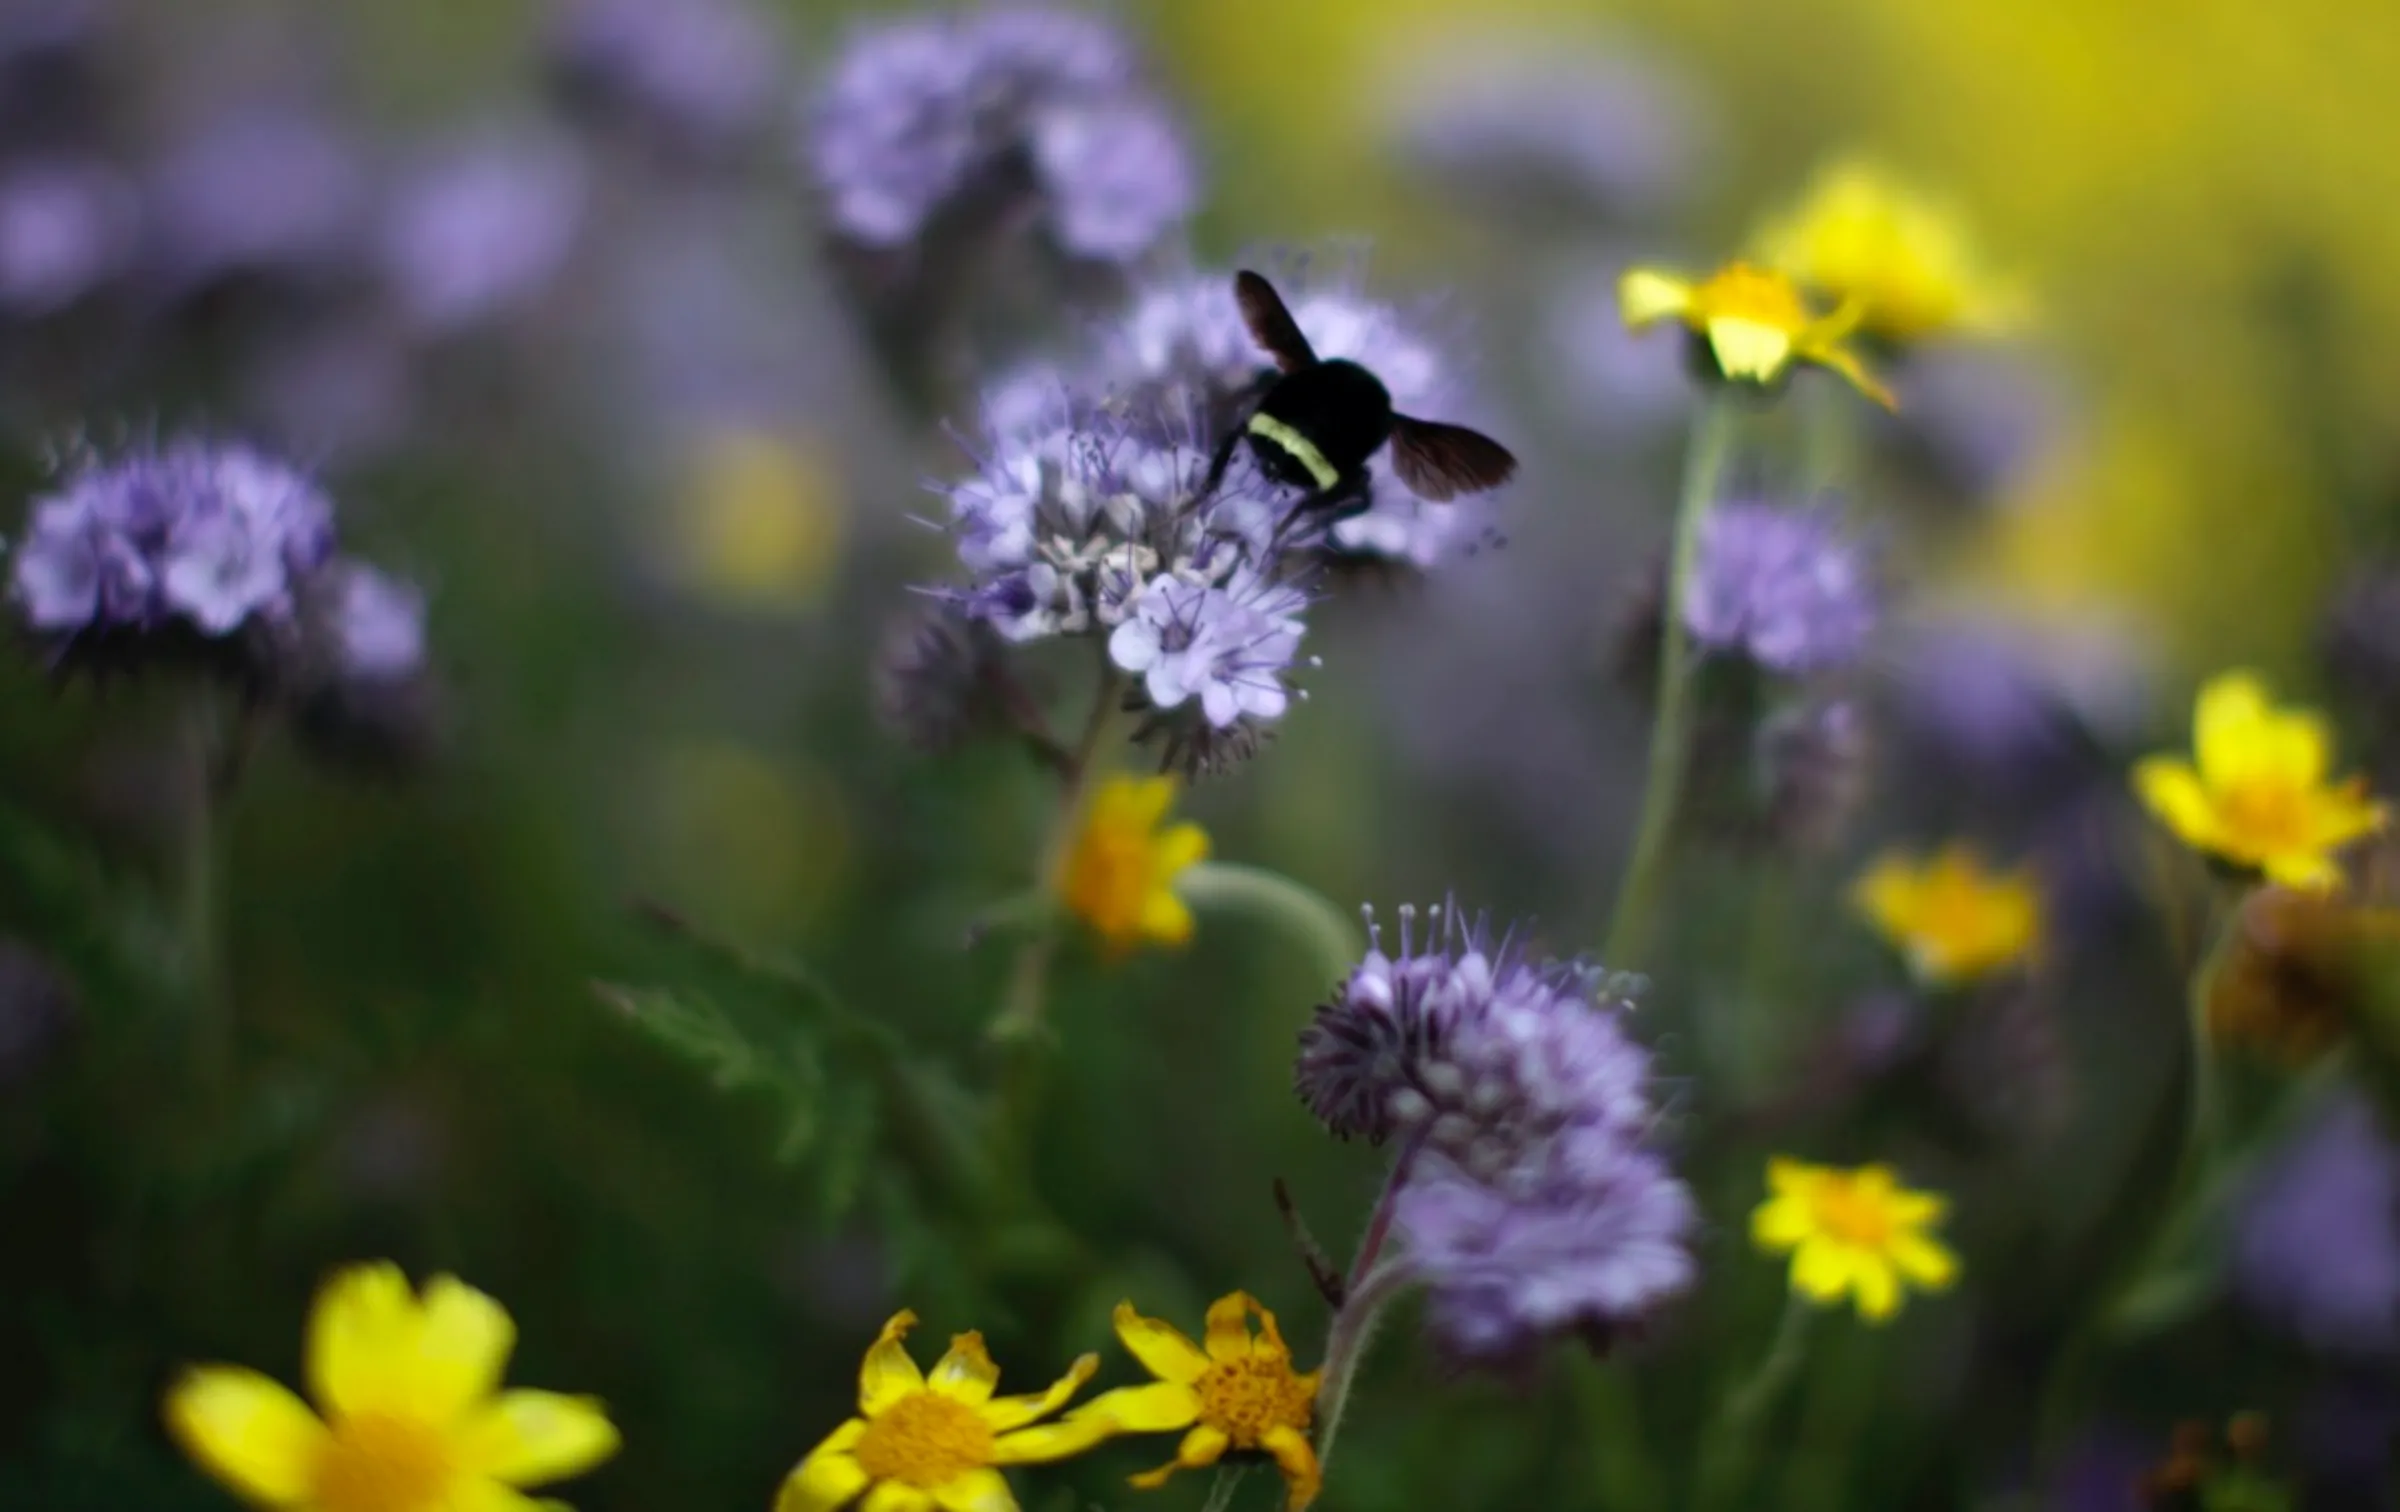 A bee lands on wildflowers in the Temblor Range, California, April 3, 2010. REUTERS/Lucy Nicholson